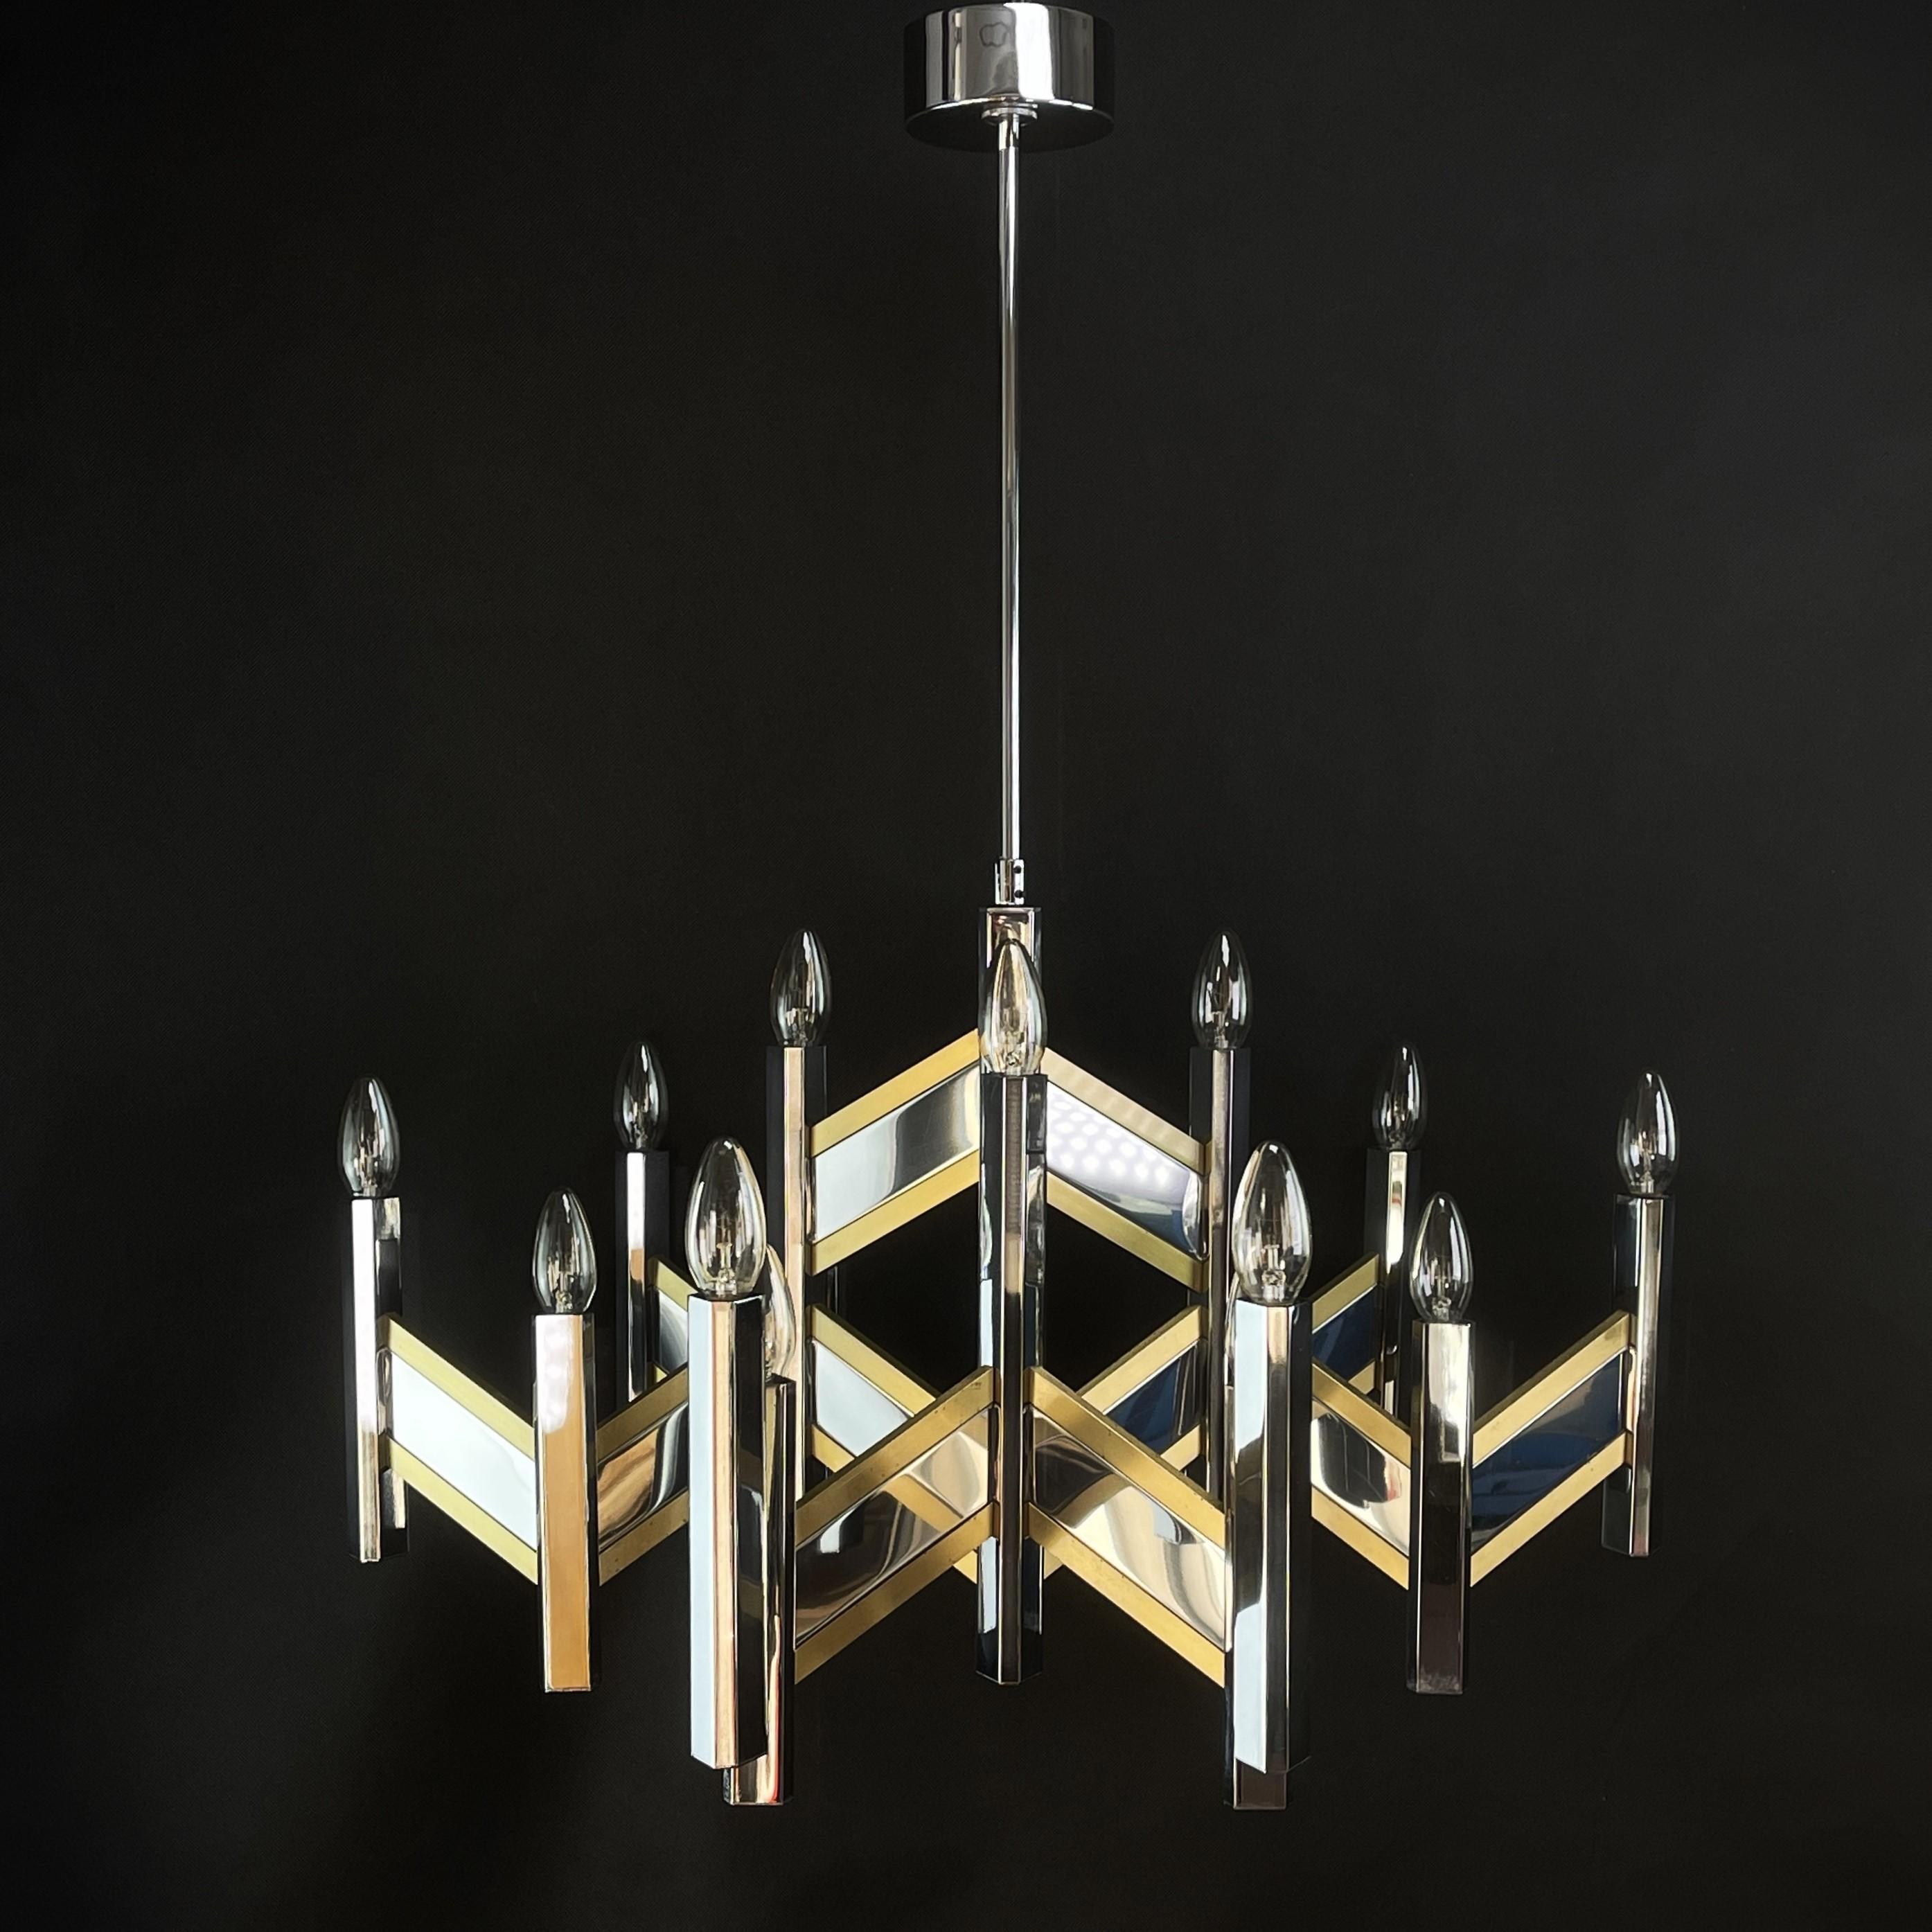 Sputnik ceiling lamp by Sciolari - 1970s

This large Sputnik lamp is a real design classic from the 1960s-1970s. The lounge lamp by Sciolari is an original and gives a pleasant light. The Italian lamp is made out of chrome and brass plated metal.